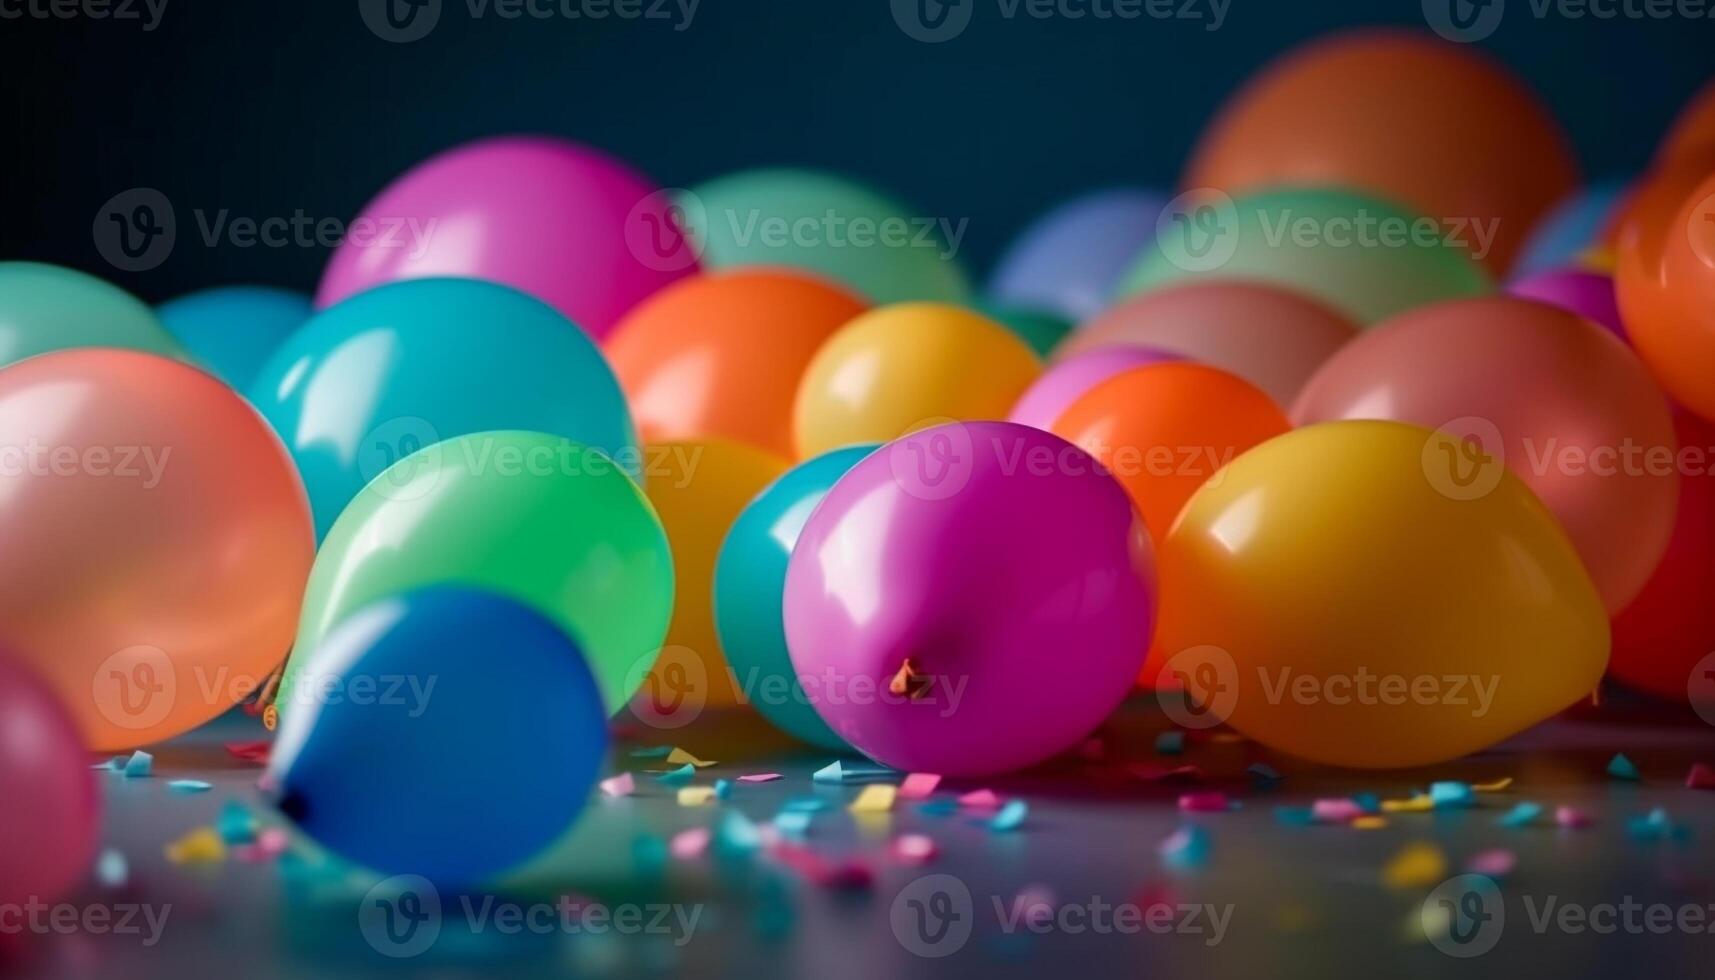 Vibrant colors of balloons create a cheerful decoration for celebration generated by AI photo